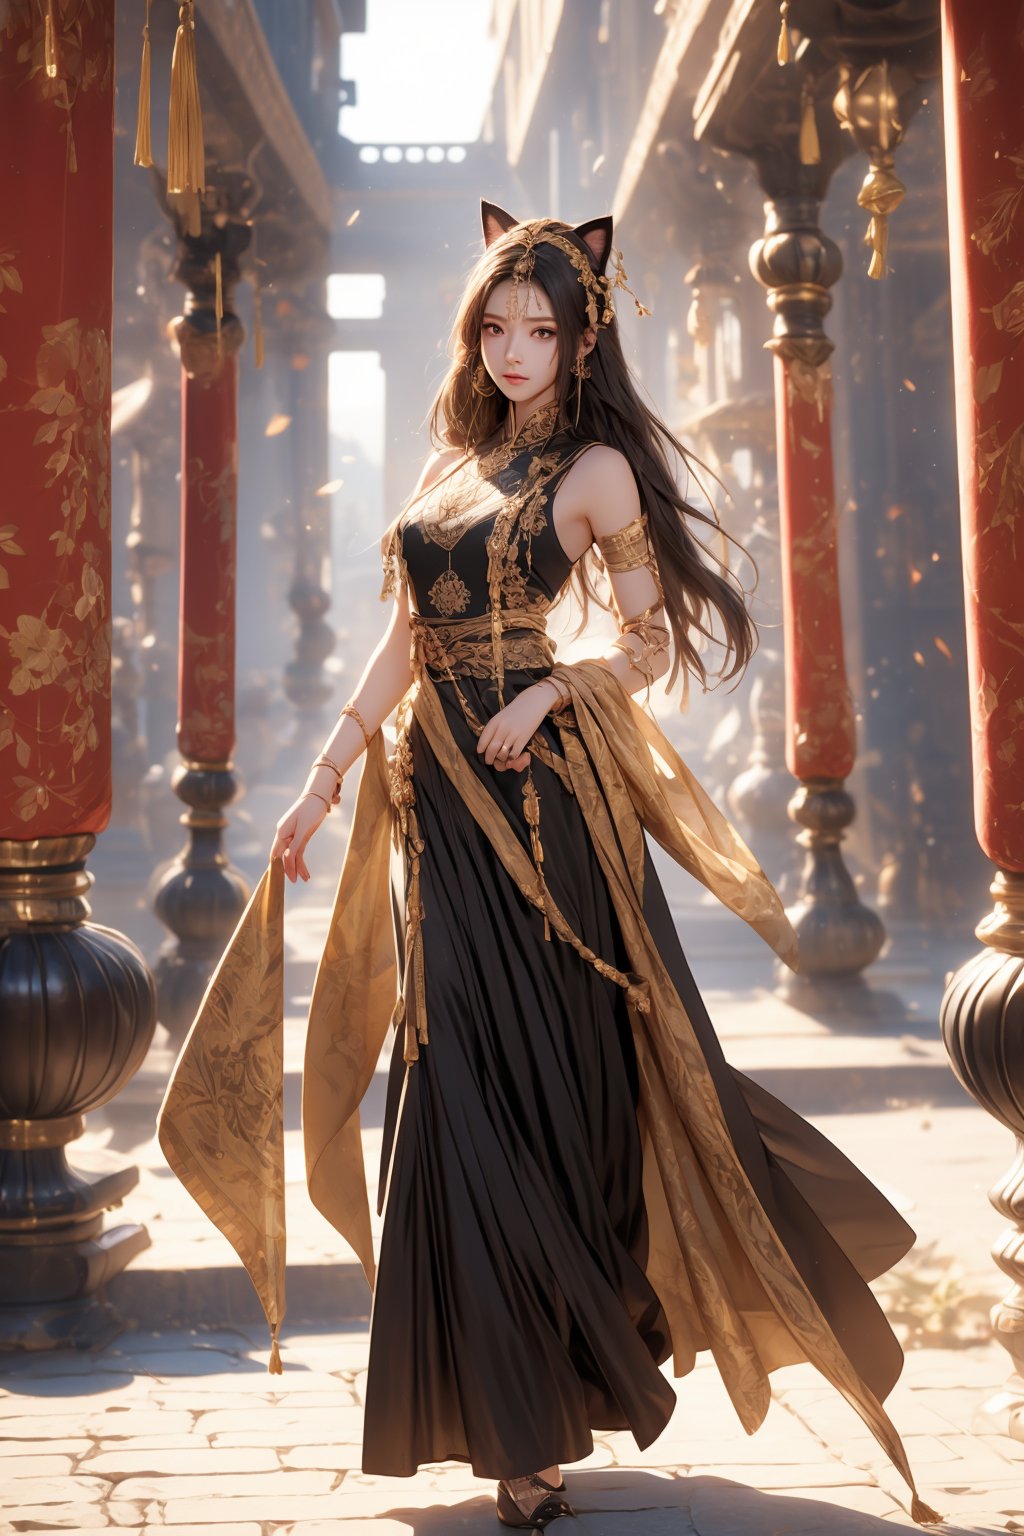 Ultra-high quality, extremely realistic, high-resolution clarity, ultra-realistic and ultra-detailed, RAW pictures,
Beautiful 16 years old Korean girl, wearing sleeveless tunic, beautiful female figure, long straight hair, ancient Chinese clothing, 1 girl, (face portrait), style: hyper-realistic, 8k ultra high definition, inspired by Pixar, Cinema 4D, China, young girl, China, black cat ears, cat witch, full body shot, standing on rock